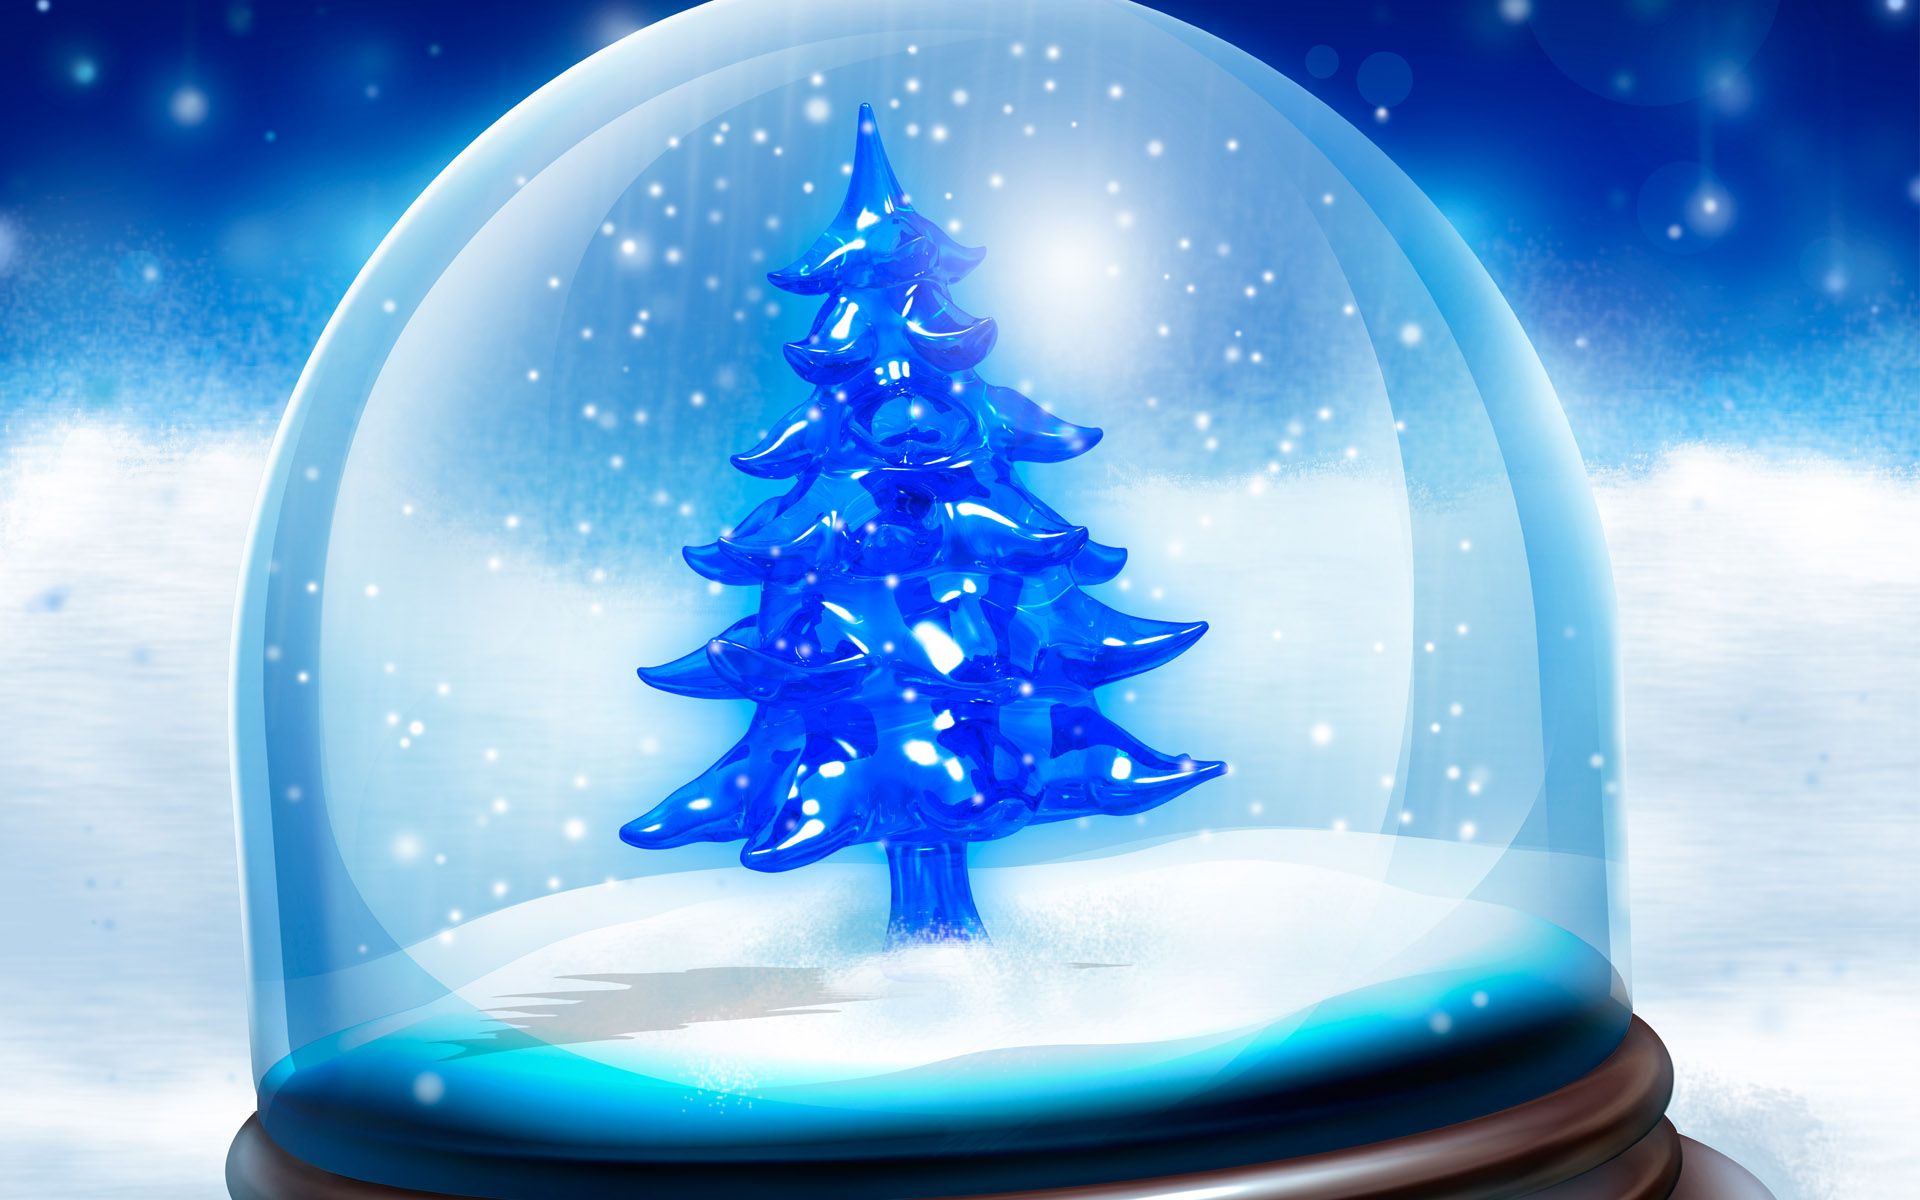 Snowy Christmas Tree Wallpapers | HD Wallpapers